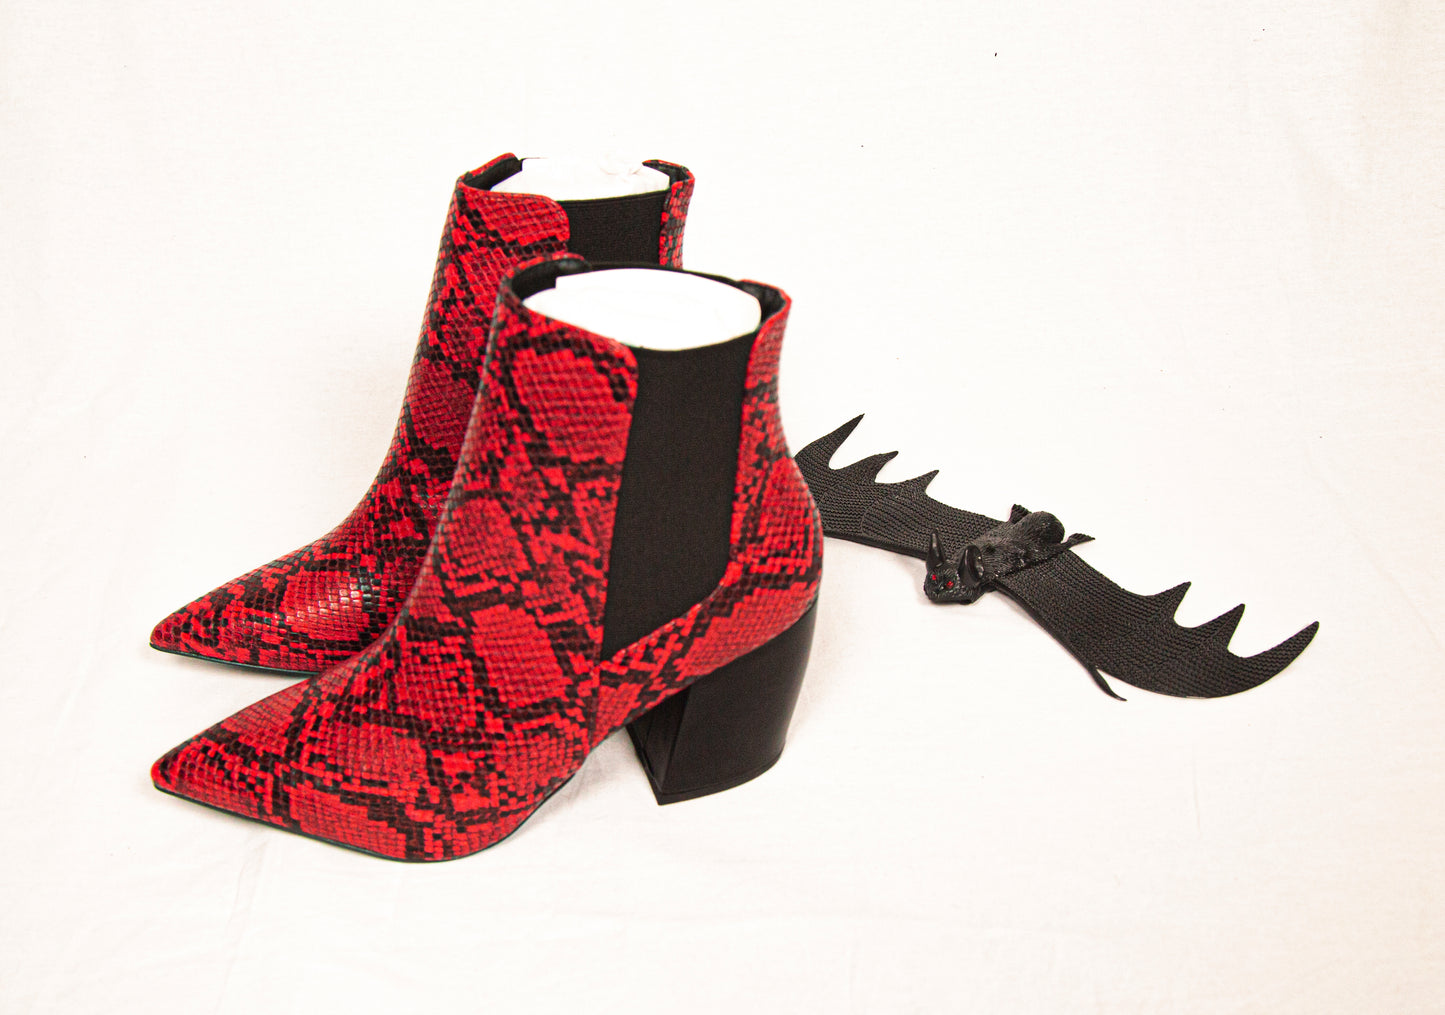 BAT OUT OF HELL RED SNAKESKIN BOOTIES